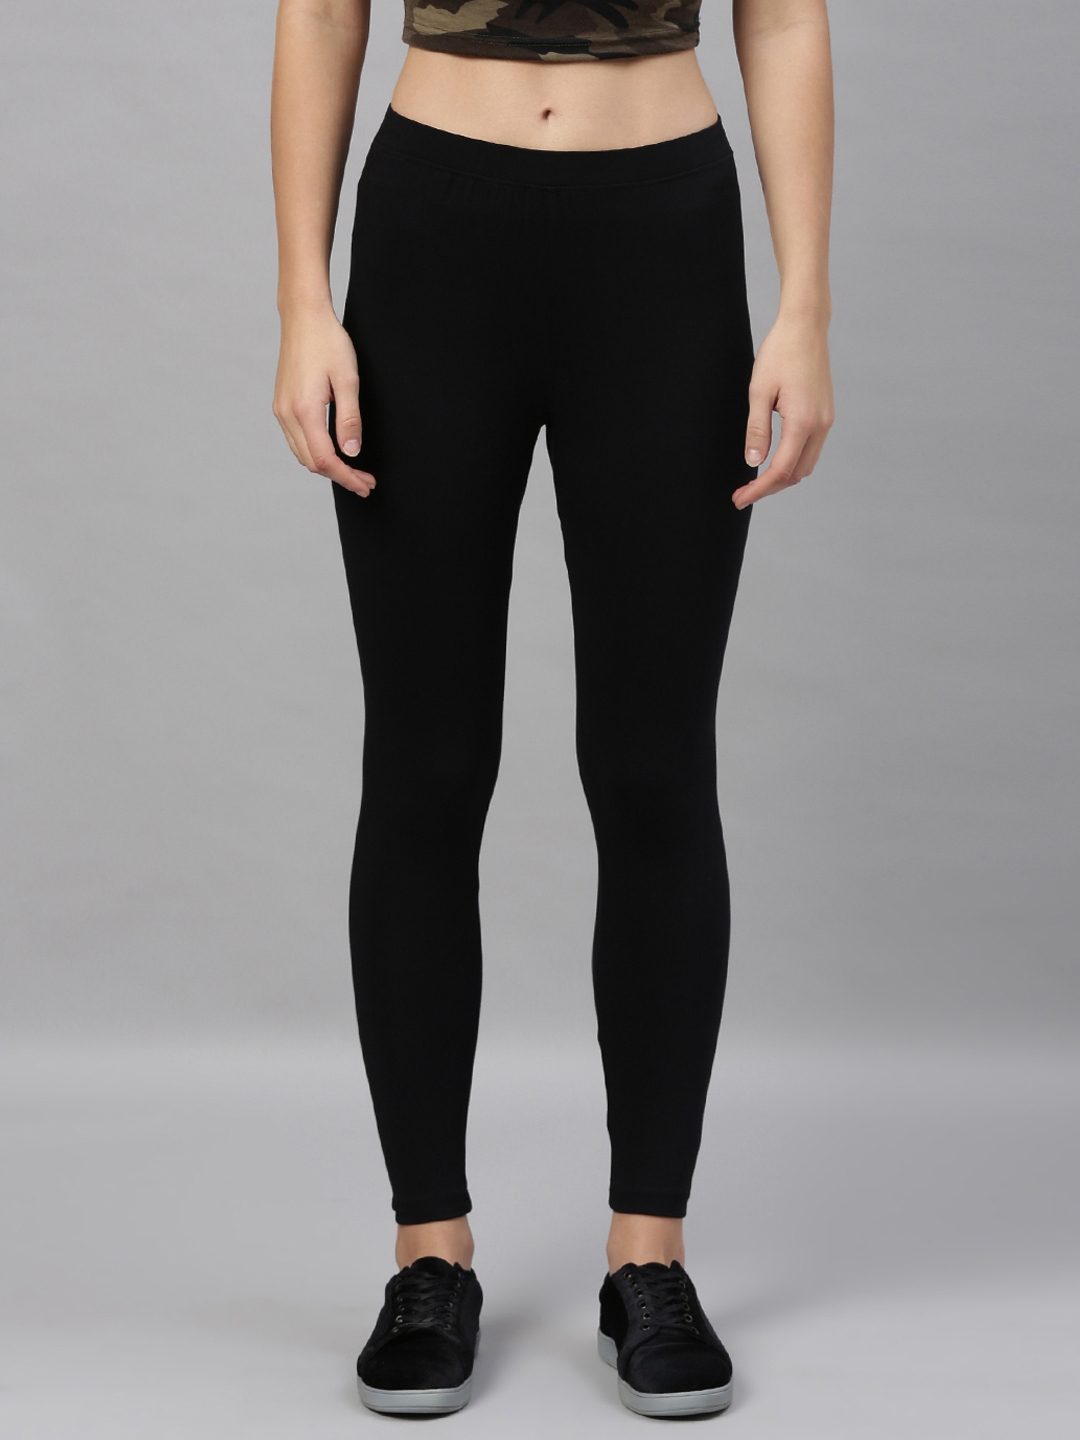 Kryptic | Kryptic Women's Cotton Stretch Solid Ankle Length Leggings